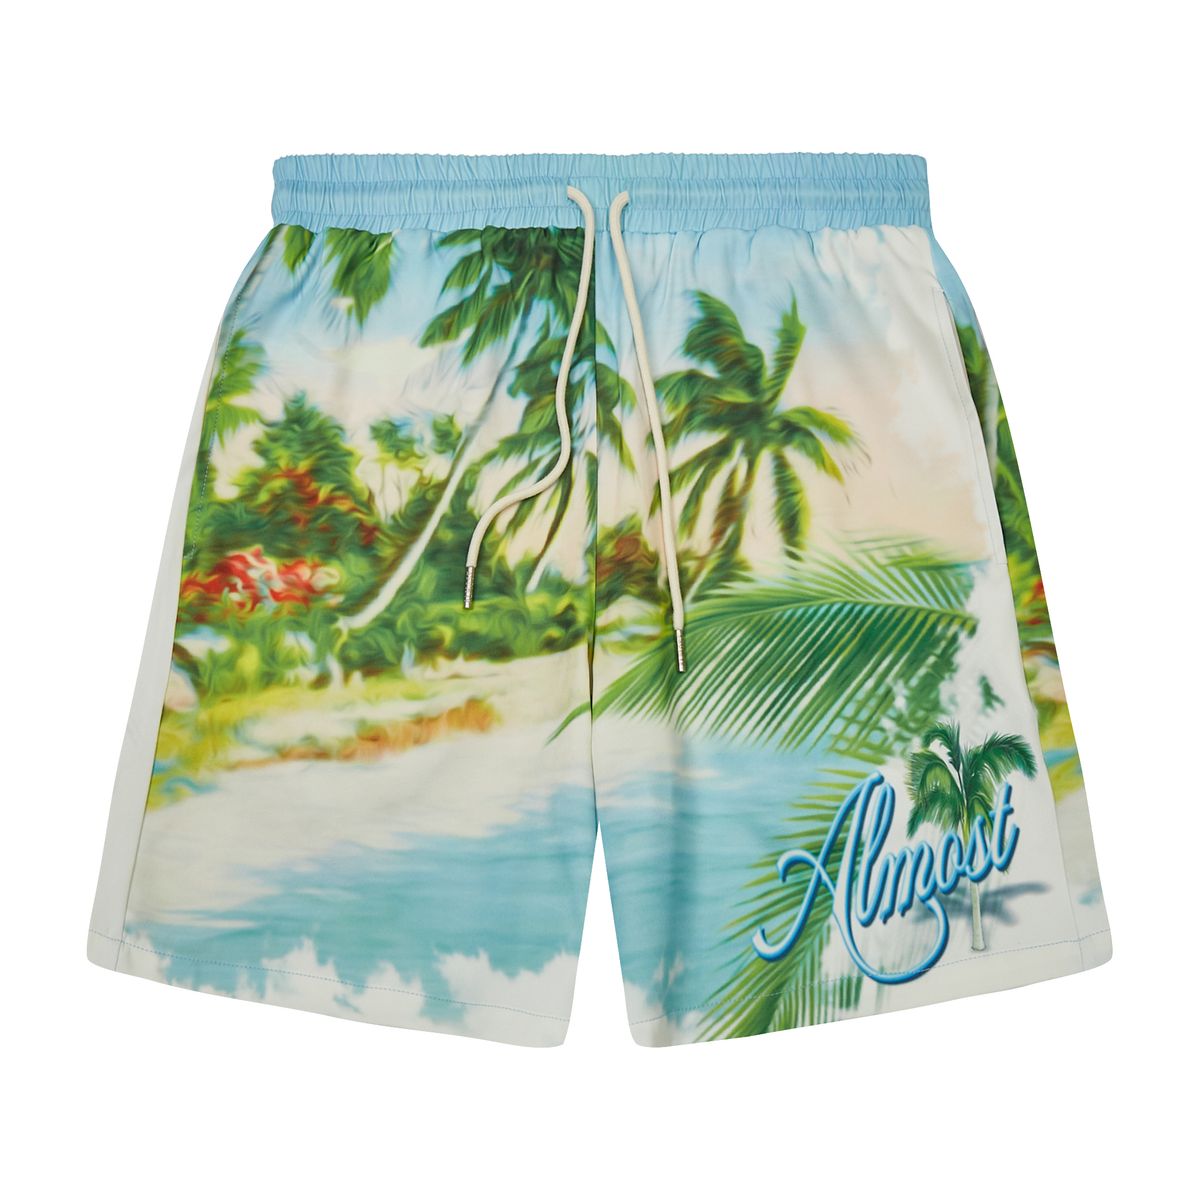 Almost Someday "PARADISE SHORTS"